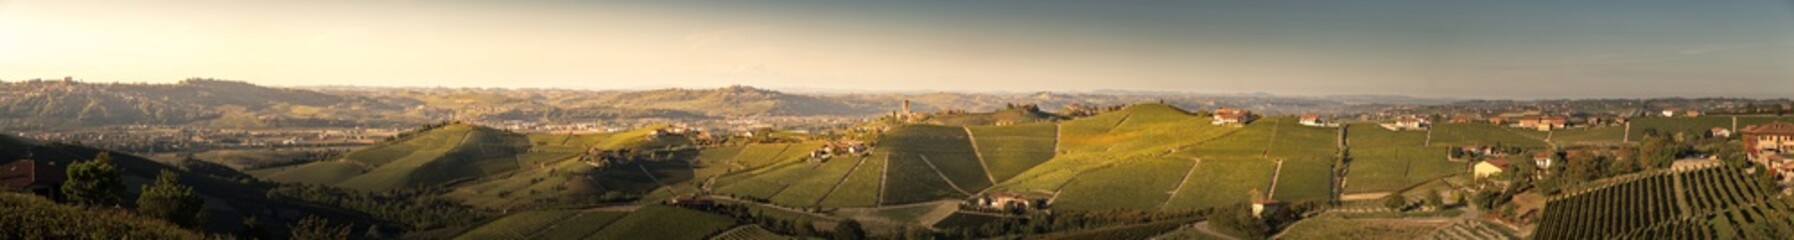 panorama of barbaresco in the langhe with the vineyards